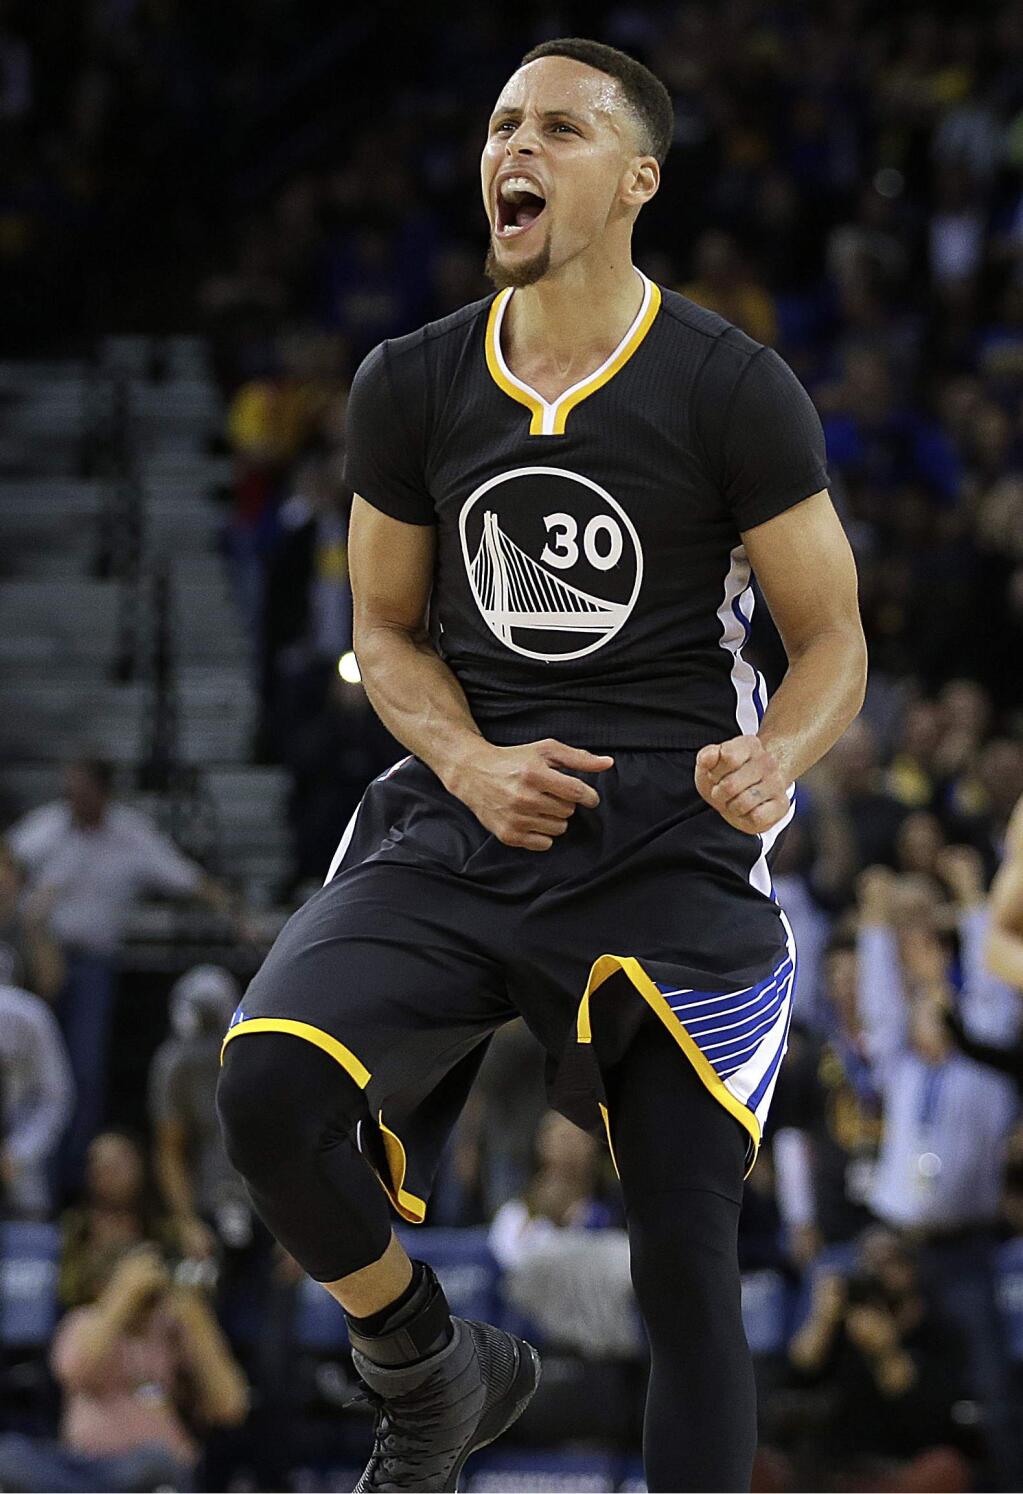 FILE - In this March 12, 2016, file photo, Golden State Warriors' Stephen Curry celebrates a score against the Phoenix Suns in the final seconds of an NBA basketball game Saturday in Oakland, Calif. Curry is adding a second straight MVP award to his record-setting season, a person with knowledge of the award told The Associated Press, Monday, May 9, 2016. The person spoke on condition of anonymity because the NBA has not revealed the winner. (AP Photo/Ben Margot File)